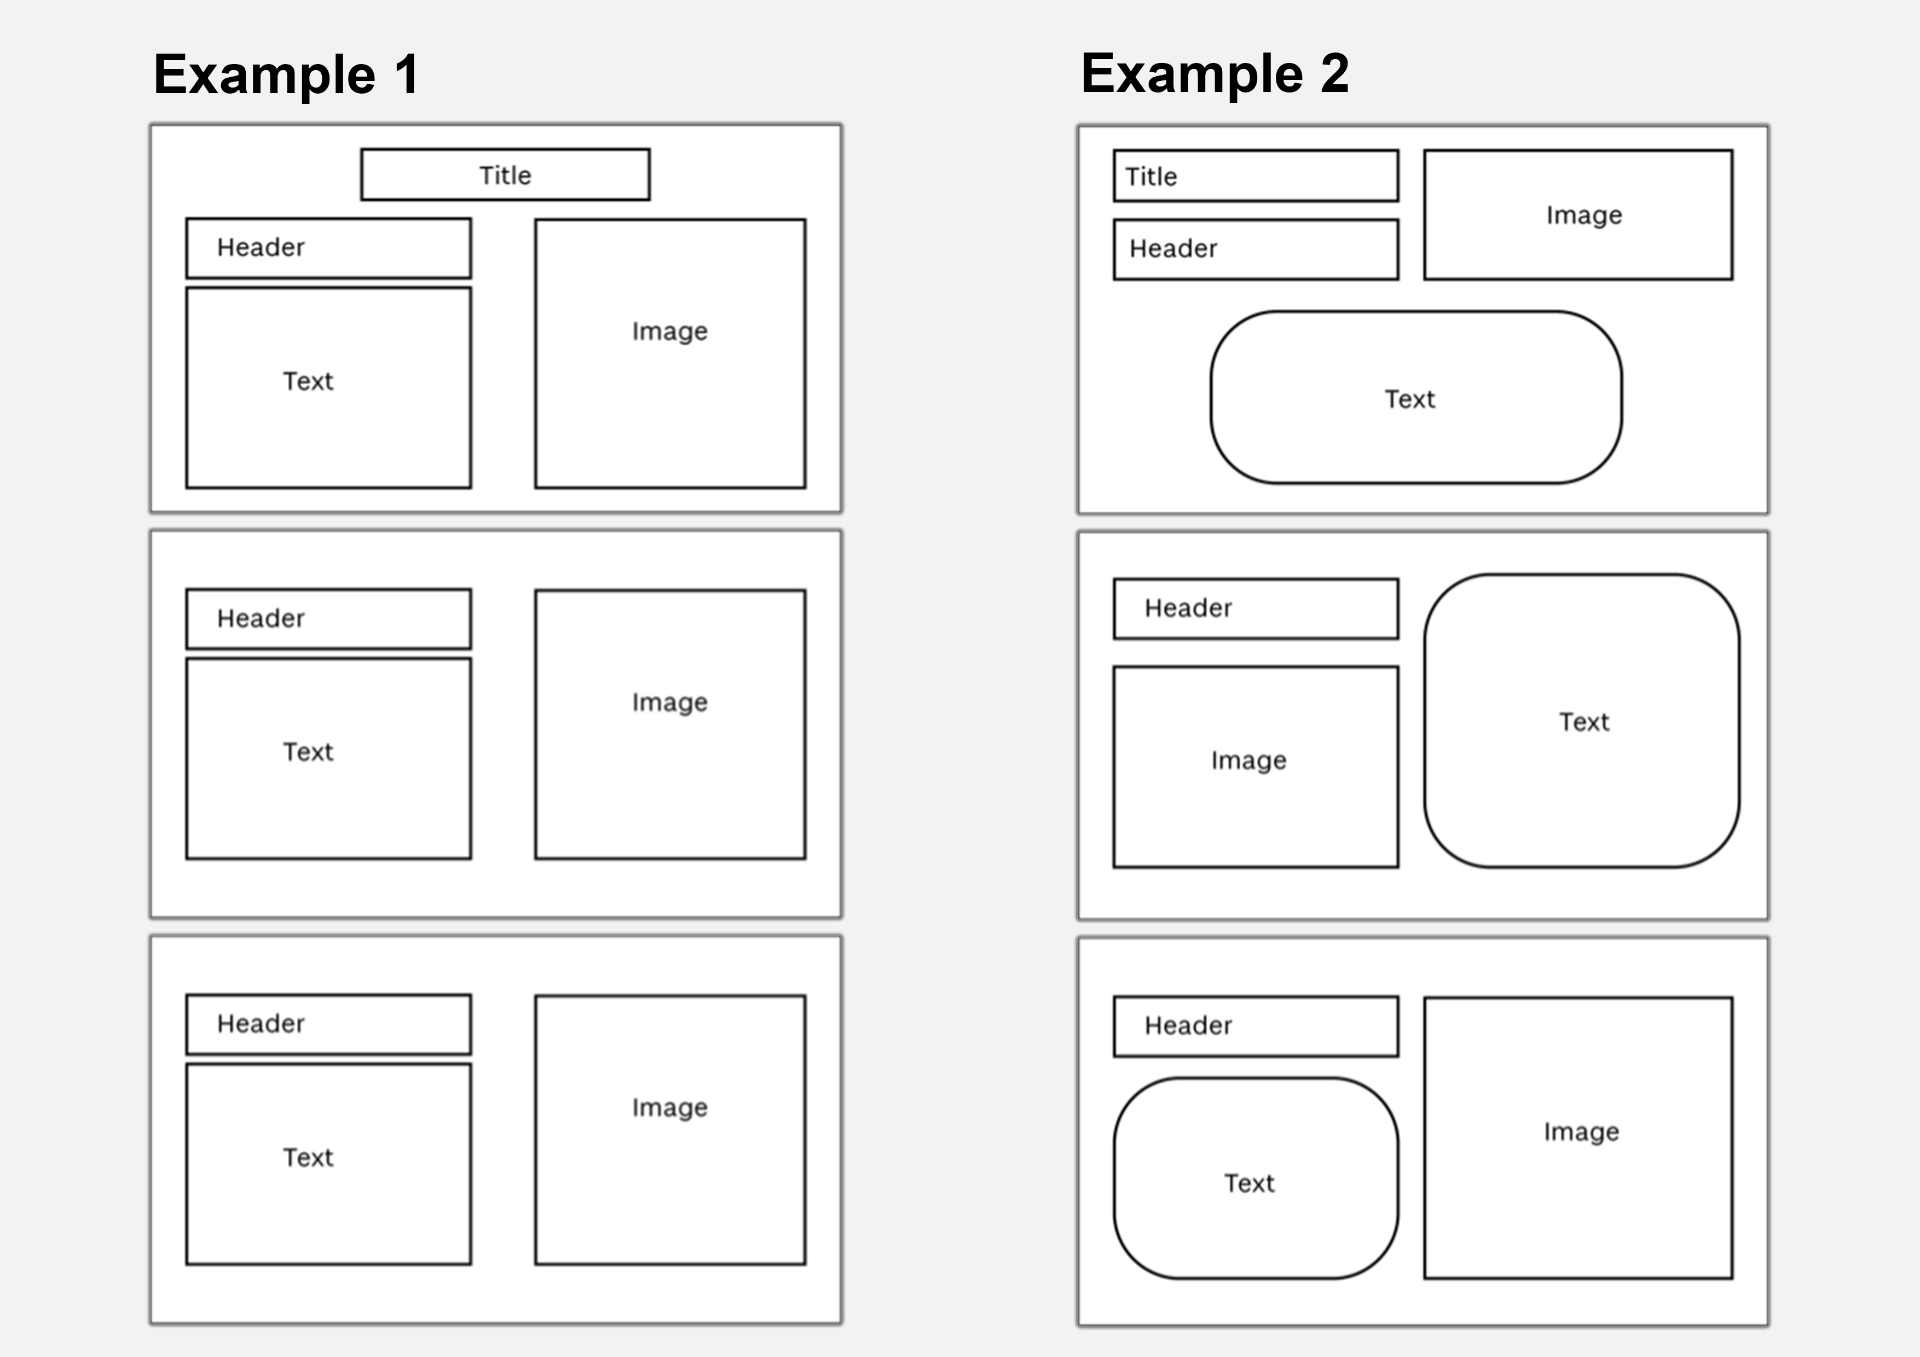 Examples 1 and 2 showing consistent presentation layouts